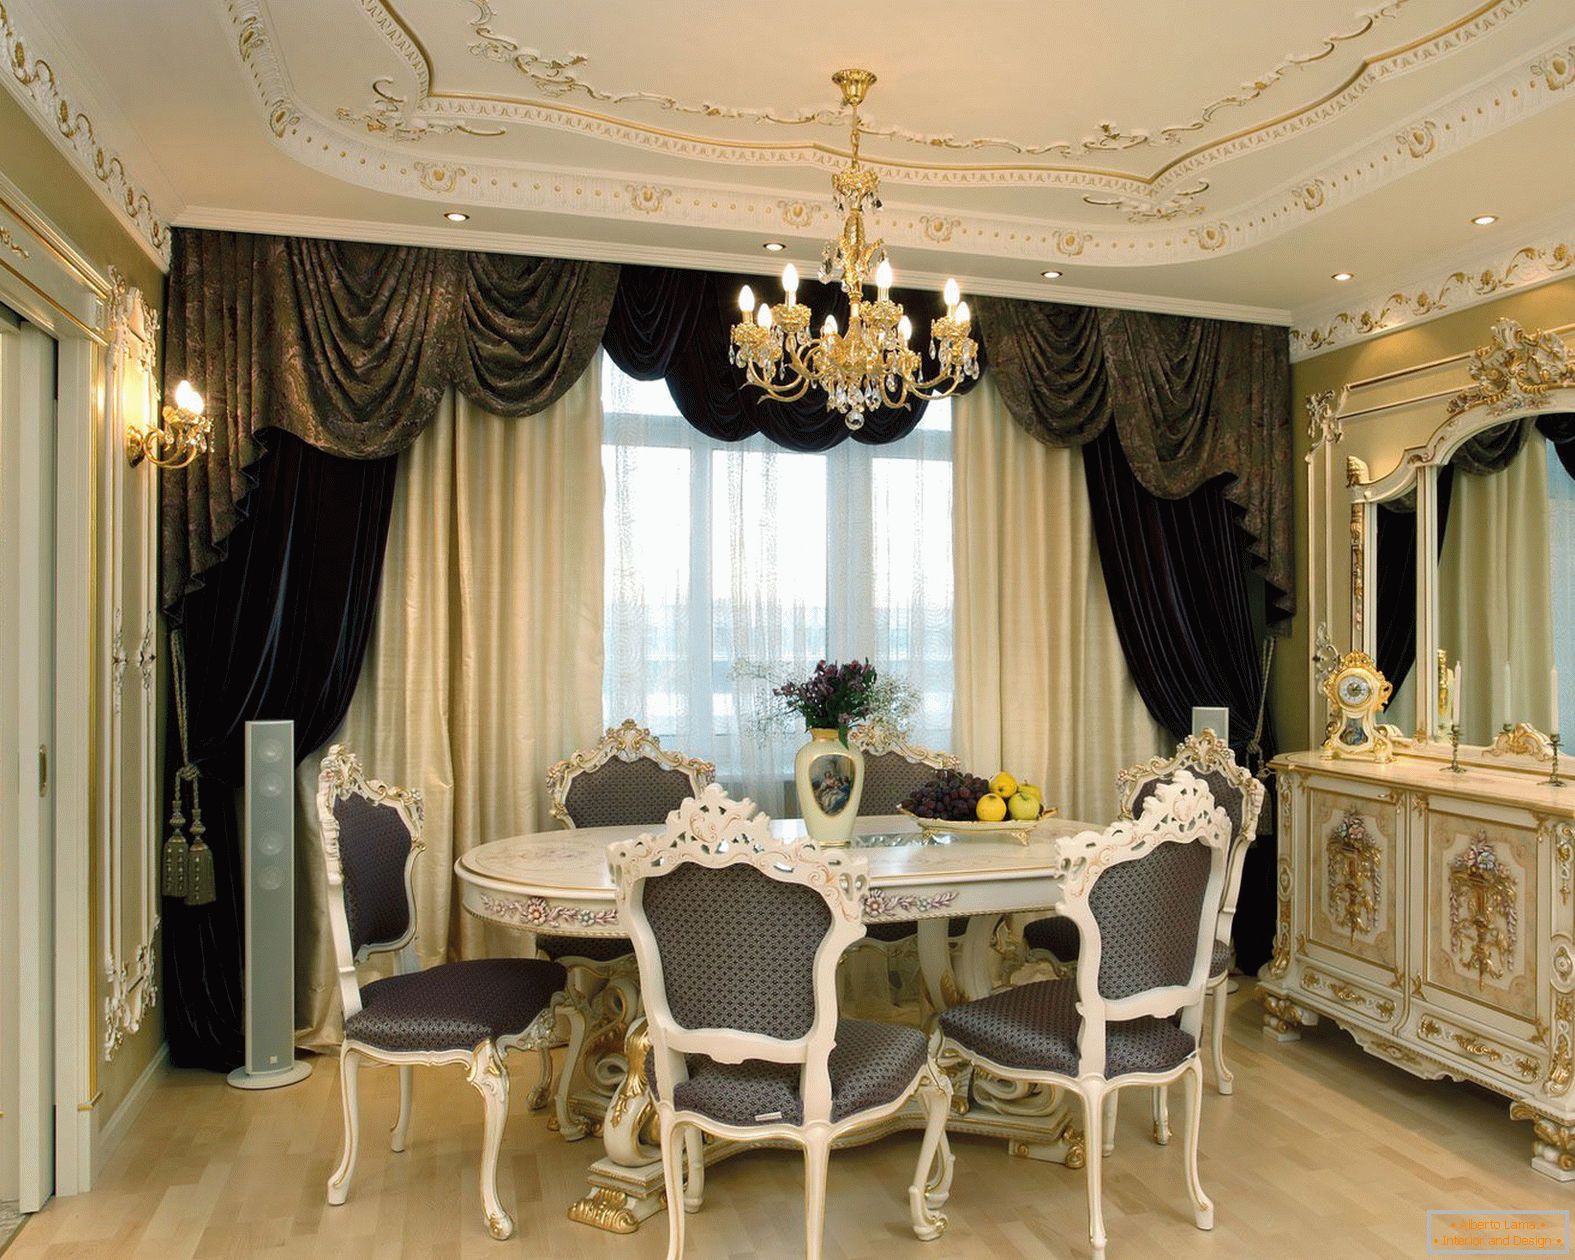 Golden colors in the dining room